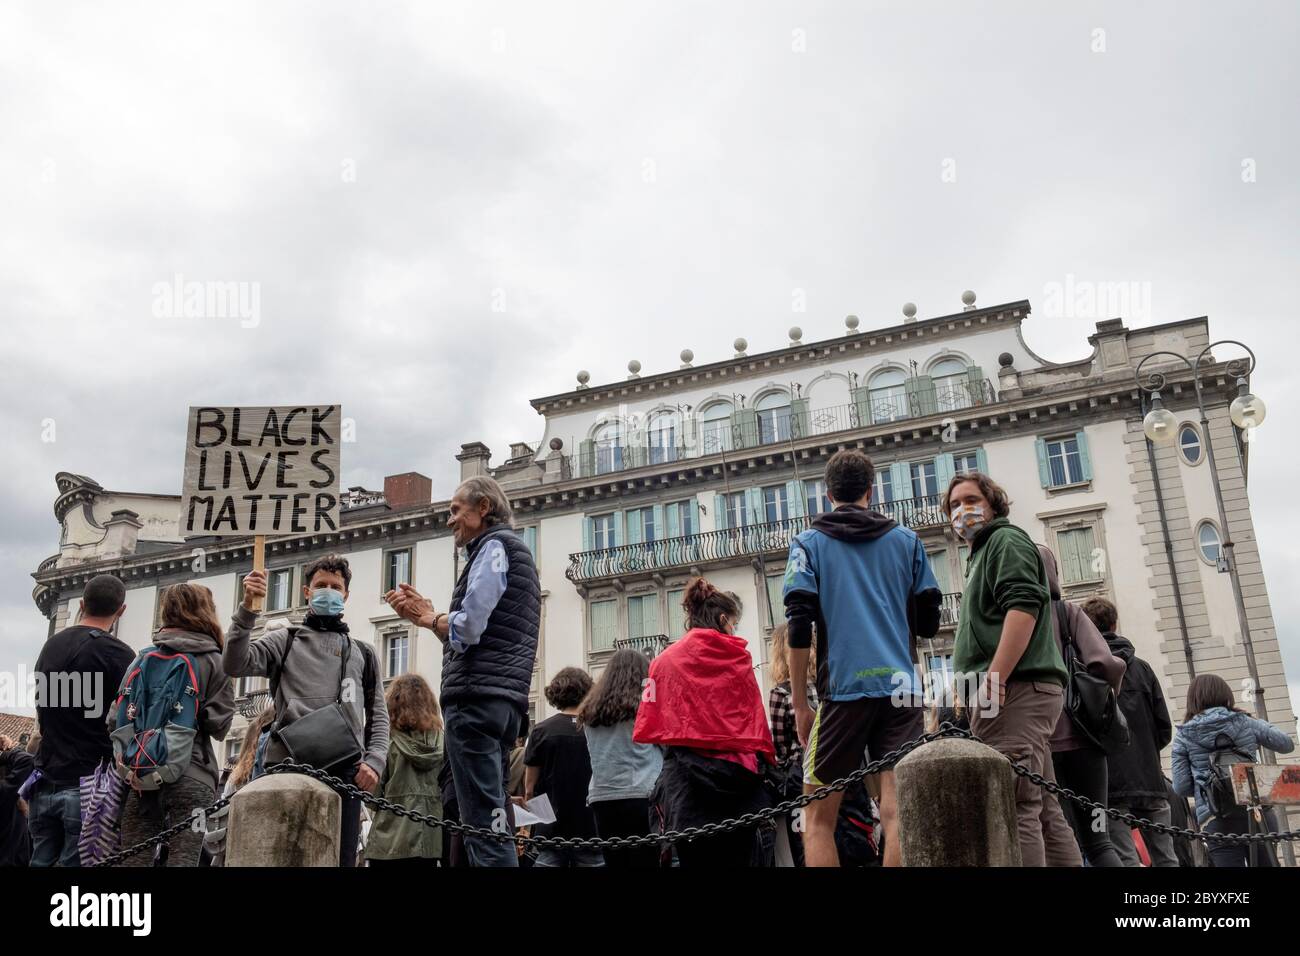 Udine, Italy. 10th June, 2020. Protestors demonstrate in solidarity with Black Lives Matter movement in Piazza XX Settembre, Udine. All over the world, solidarity anti-racist protest sparked after the death of George Floyd in Minneapolis. (Photo by Francesco Boscarol/Pacific Press) Credit: Pacific Press Agency/Alamy Live News Stock Photo